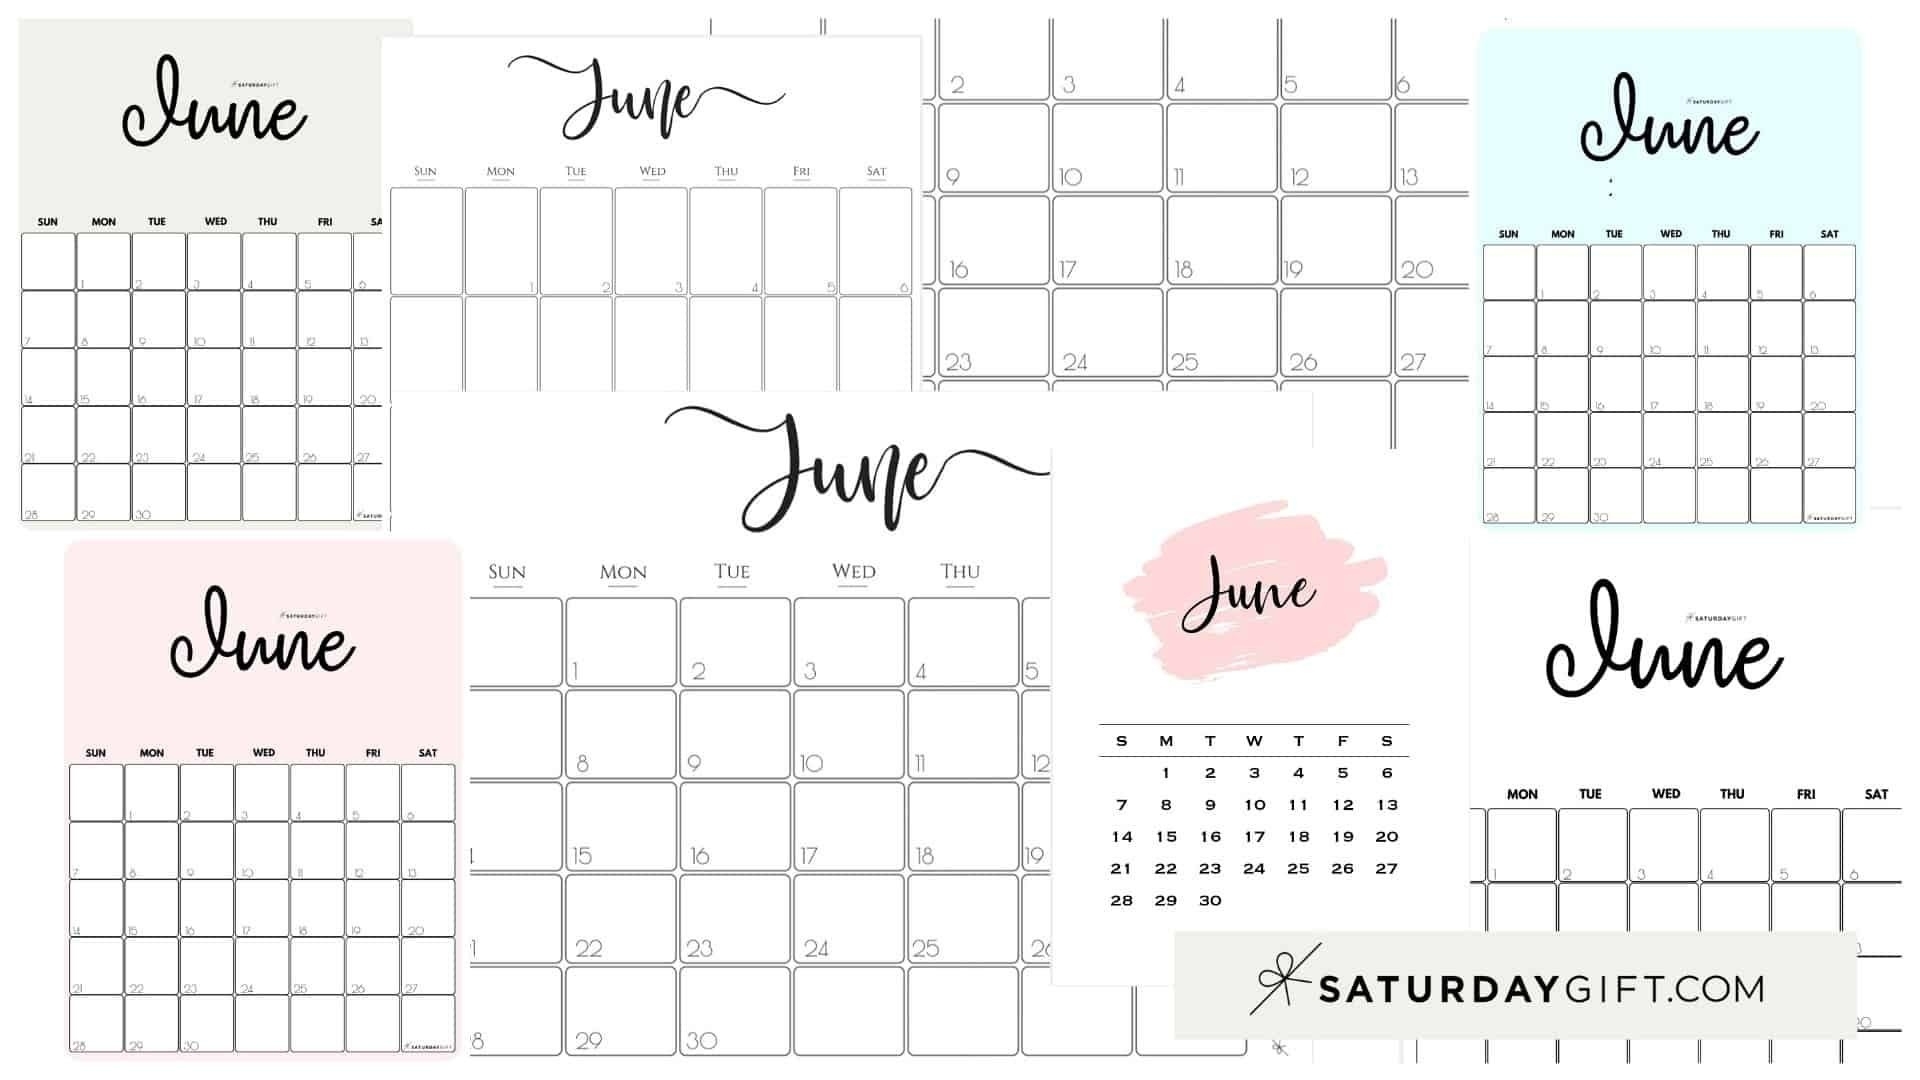 Best Printable Calendar June July August 2021 Free With Lines To Write On | Get Your Calendar Blank Calendar June July August 2021